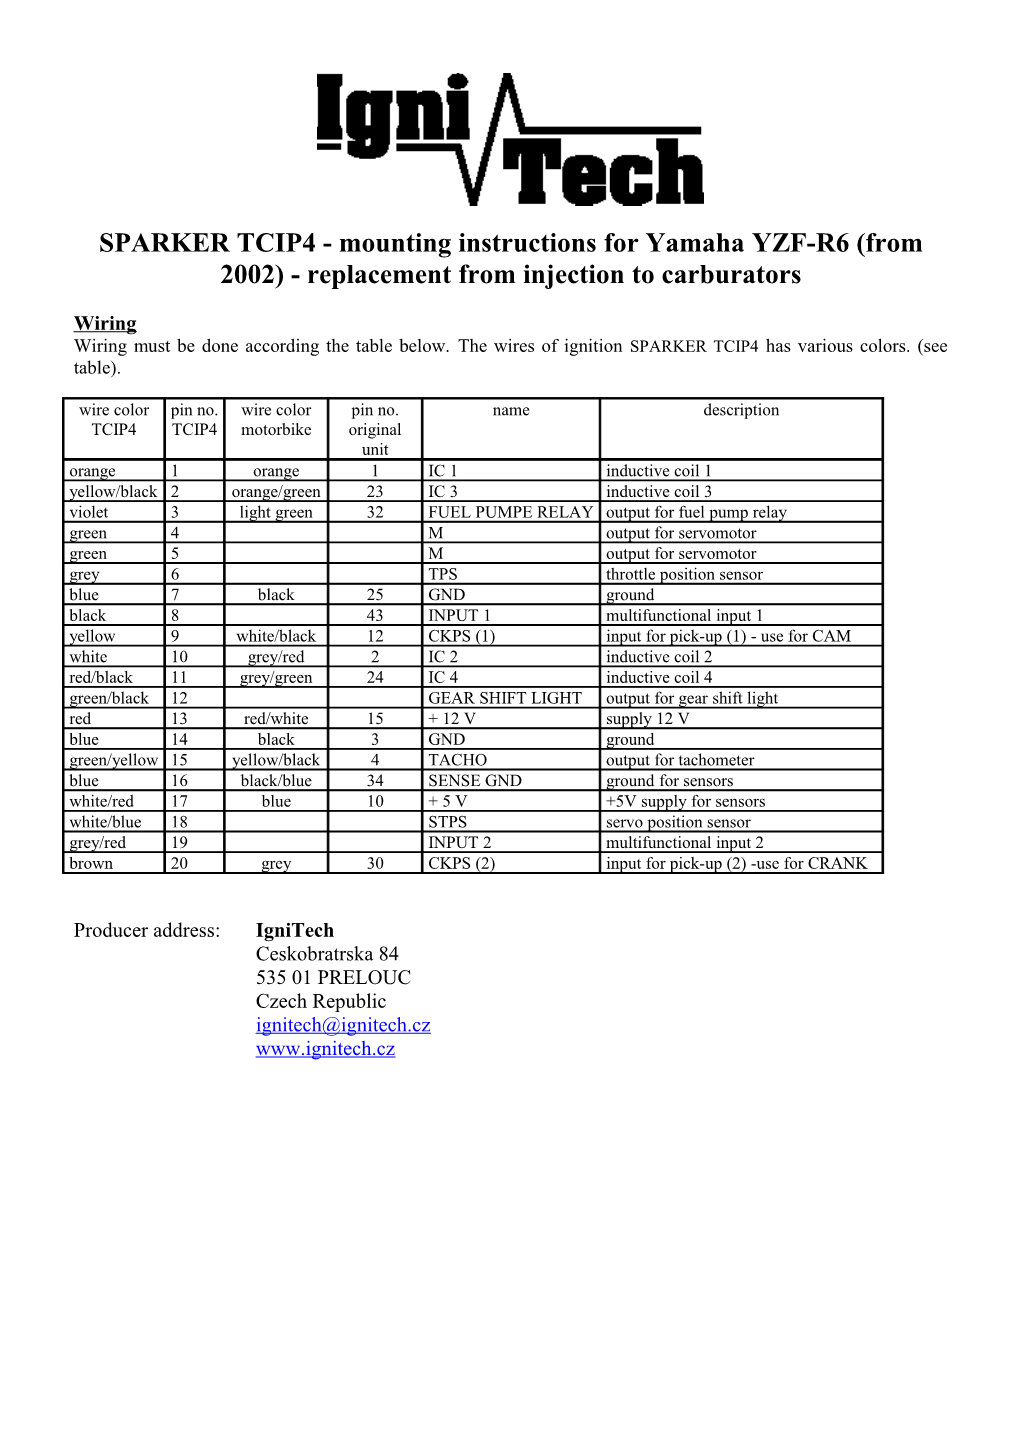 SPARKER TCIP4 - Mounting Instructions for Yamaha YZF-R6 (From 2002) - Replacement From